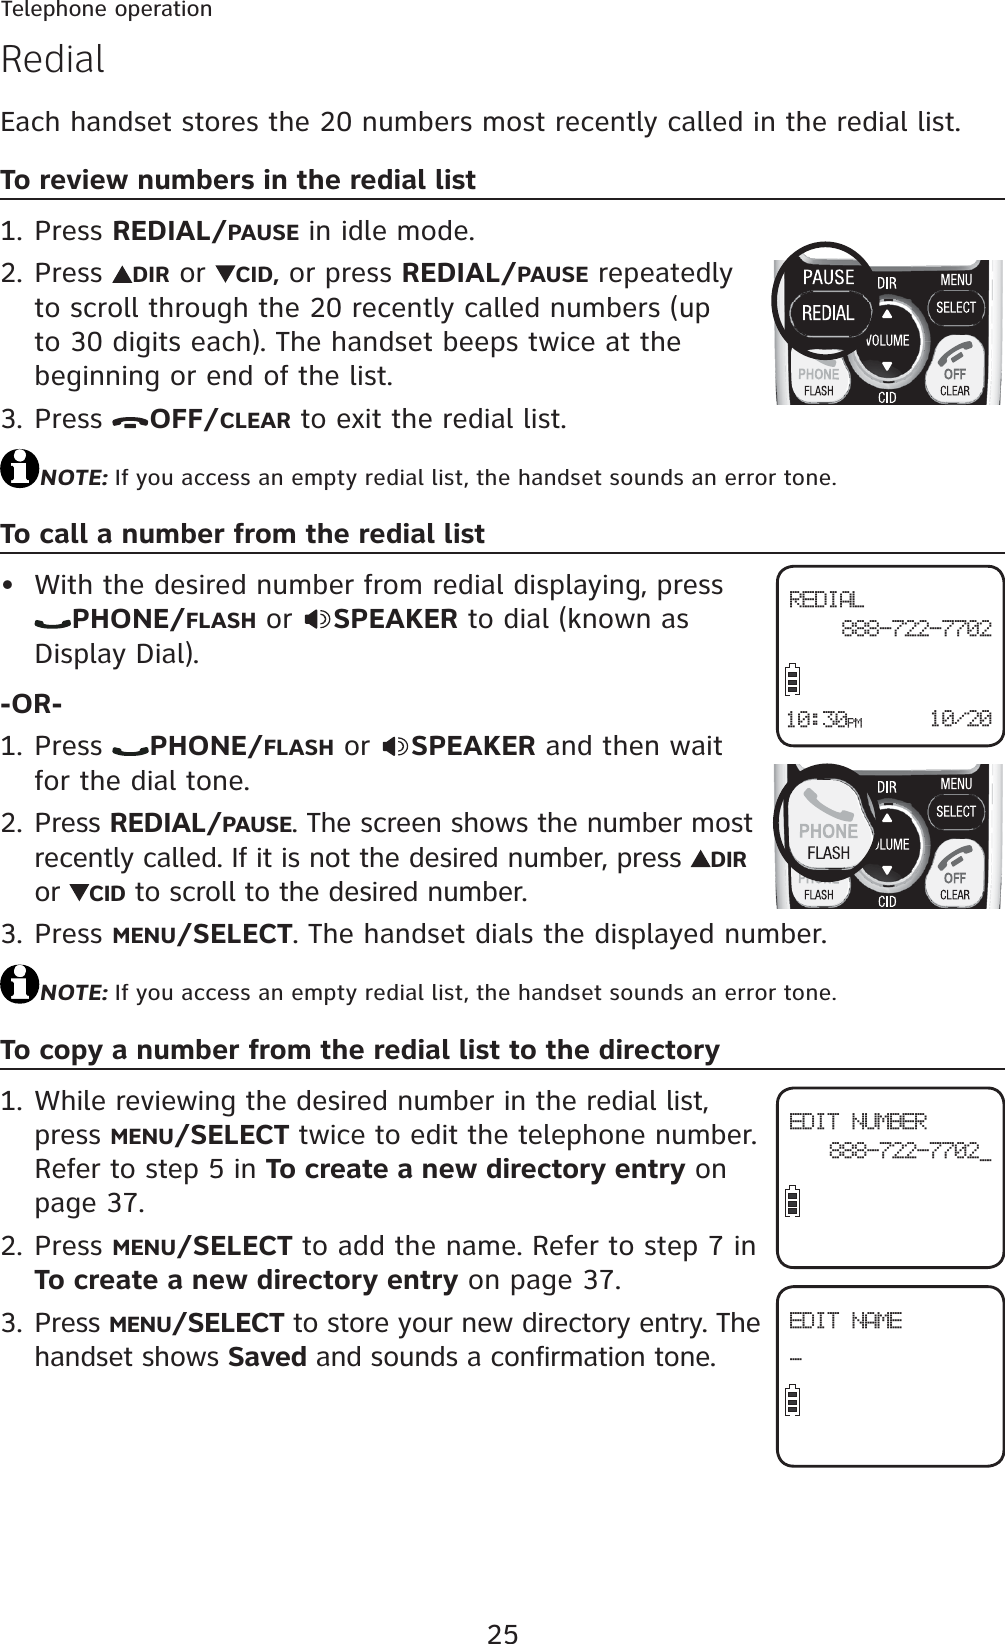 25Telephone operationRedialEach handset stores the 20 numbers most recently called in the redial list.To review numbers in the redial listPress REDIAL/PAUSE in idle mode.Press  DIR or  CID, or press REDIAL/PAUSE repeatedly to scroll through the 20 recently called numbers (up to 30 digits each). The handset beeps twice at the beginning or end of the list.Press  OFF/CLEAR to exit the redial list.NOTE: If you access an empty redial list, the handset sounds an error tone.To call a number from the redial listWith the desired number from redial displaying, press PHONE/FLASH or  SPEAKER to dial (known as Display Dial).-OR-Press  PHONE/FLASH or  SPEAKER and then wait for the dial tone.Press REDIAL/PAUSE. The screen shows the number most recently called. If it is not the desired number, press  DIRor  CID to scroll to the desired number.Press MENU/SELECT. The handset dials the displayed number.NOTE: If you access an empty redial list, the handset sounds an error tone.To copy a number from the redial list to the directoryWhile reviewing the desired number in the redial list, press MENU/SELECT twice to edit the telephone number. Refer to step 5 in To create a new directory entry on page 37.Press MENU/SELECT to add the name. Refer to step 7 in To create a new directory entry on page 37.Press MENU/SELECT to store your new directory entry. The handset shows Saved and sounds a confirmation tone.1.2.3.•1.2.3.1.2.3.REDIAL 888-722-770210/2010:30PMEDIT NUMBER888-722-7702_EDIT NAME_